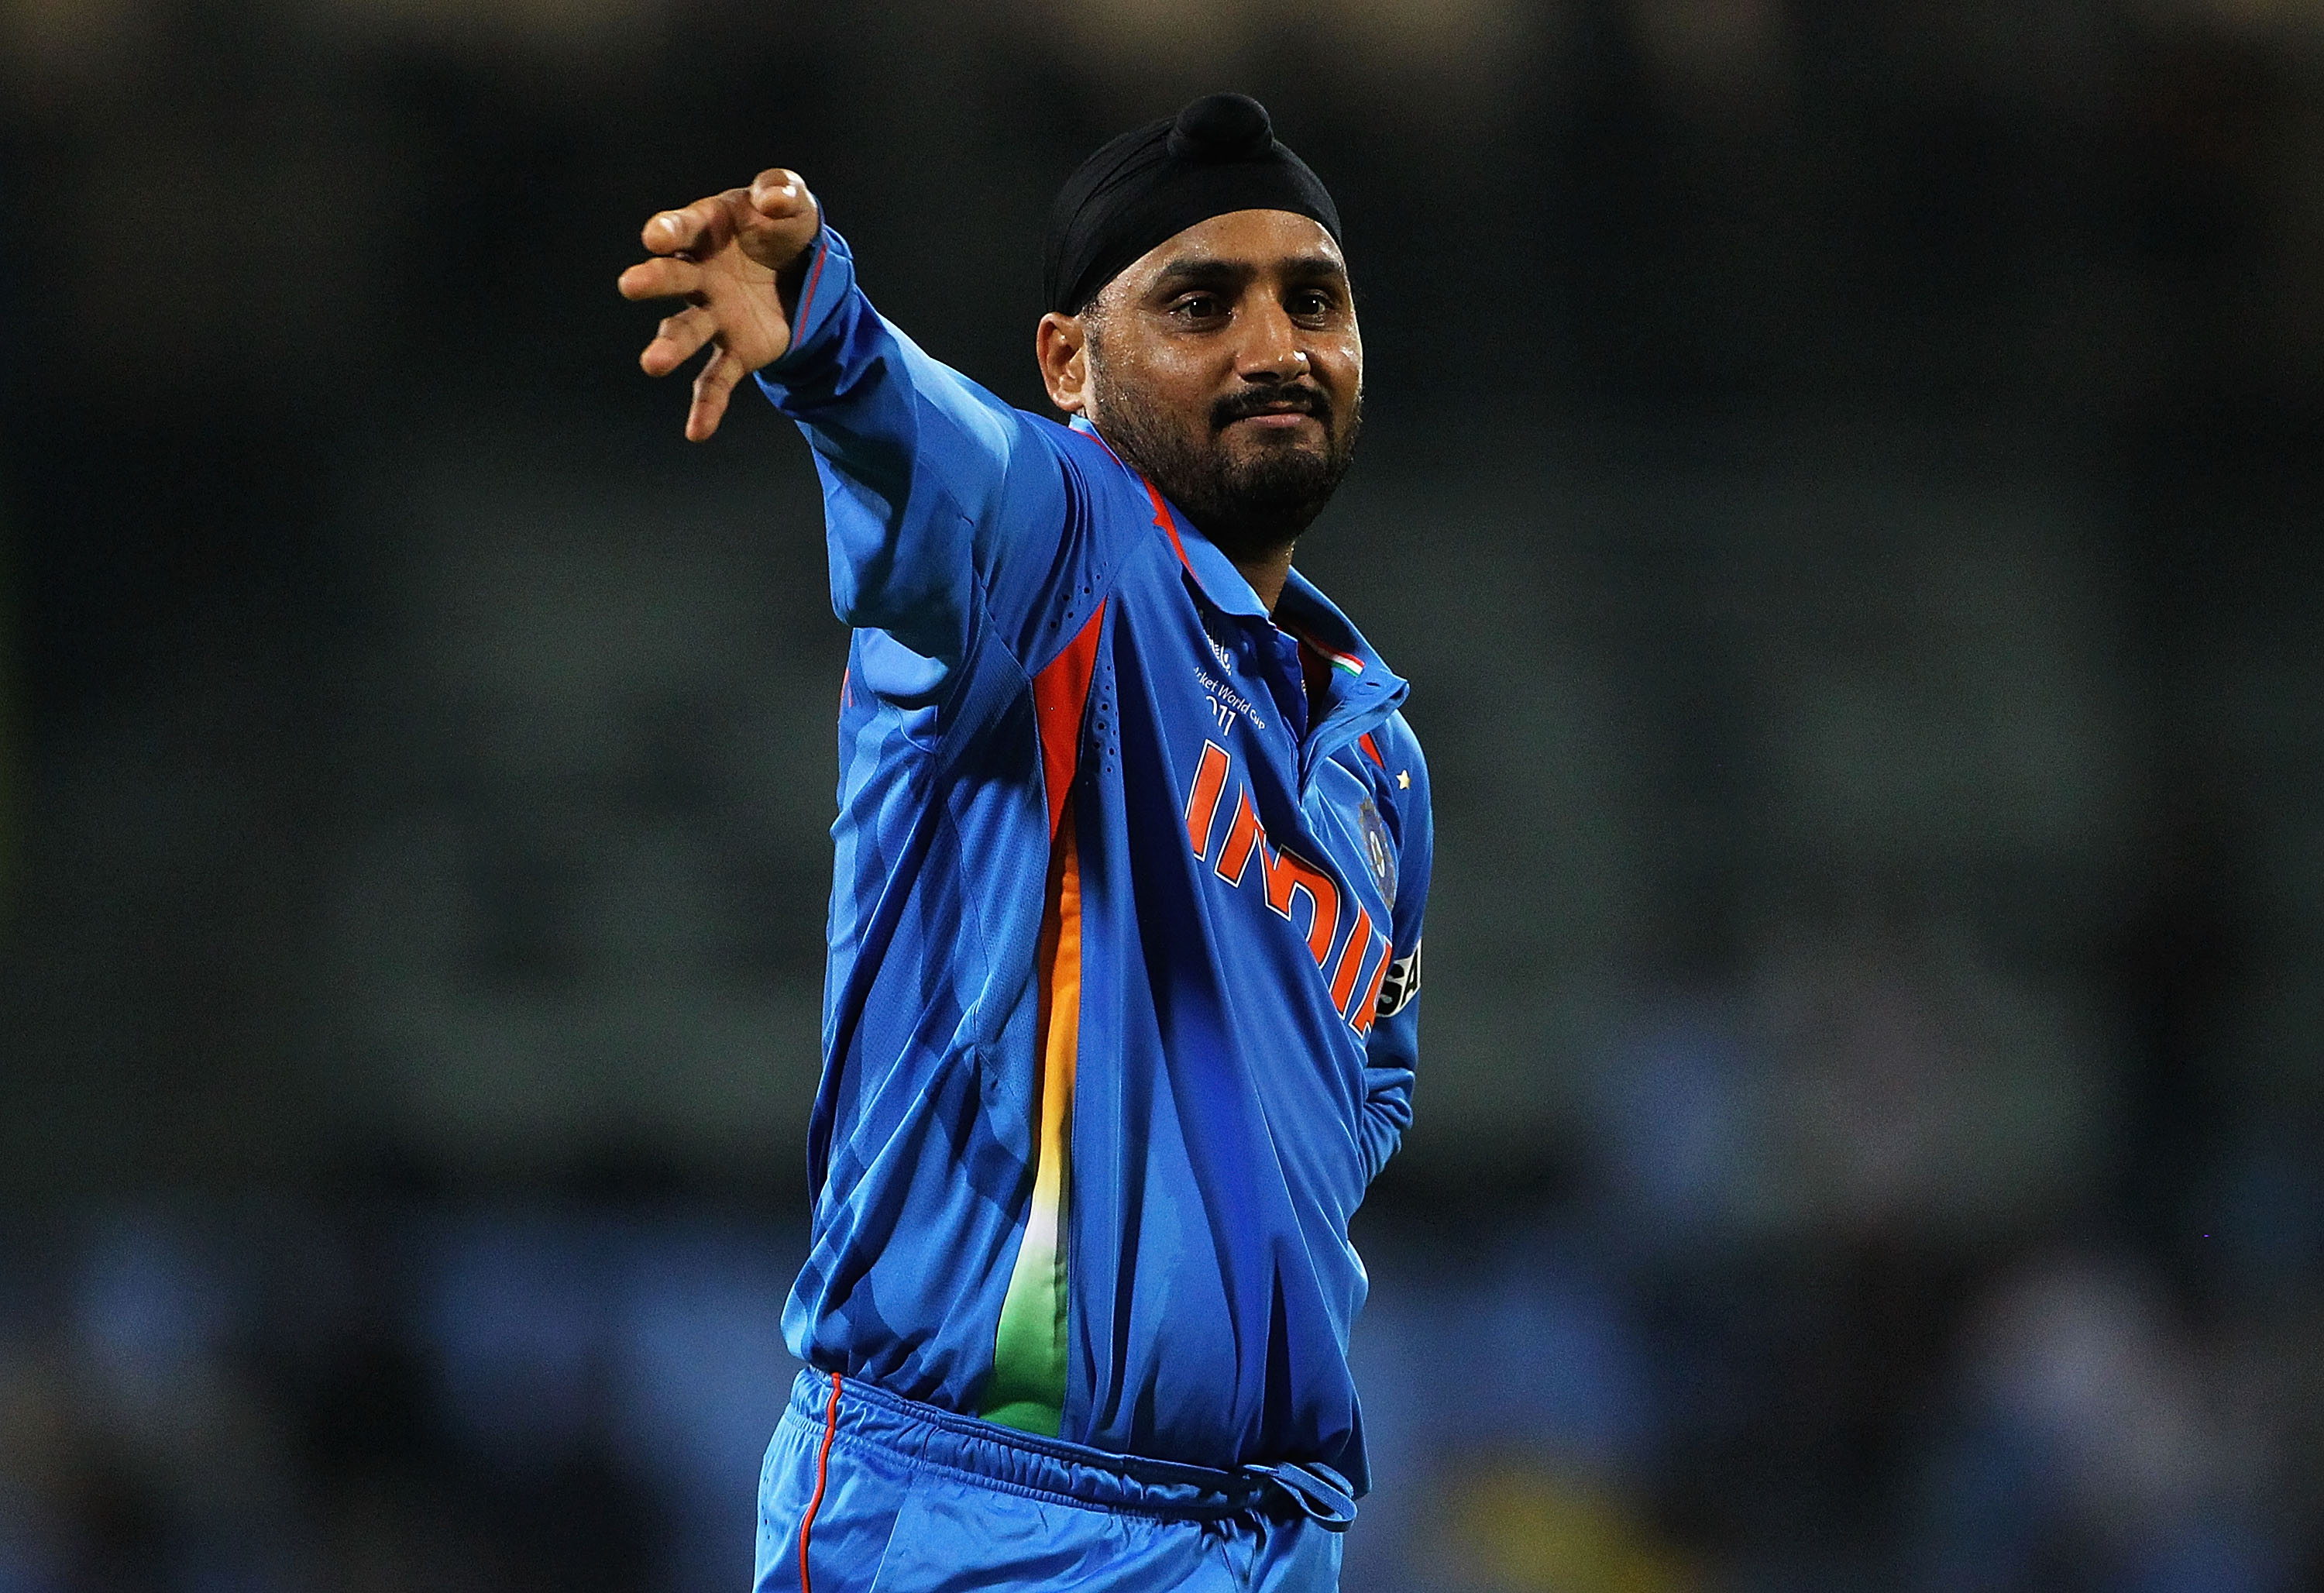 Never found it difficult to bowl against Chris Gayle, claims Harbhajan Singh